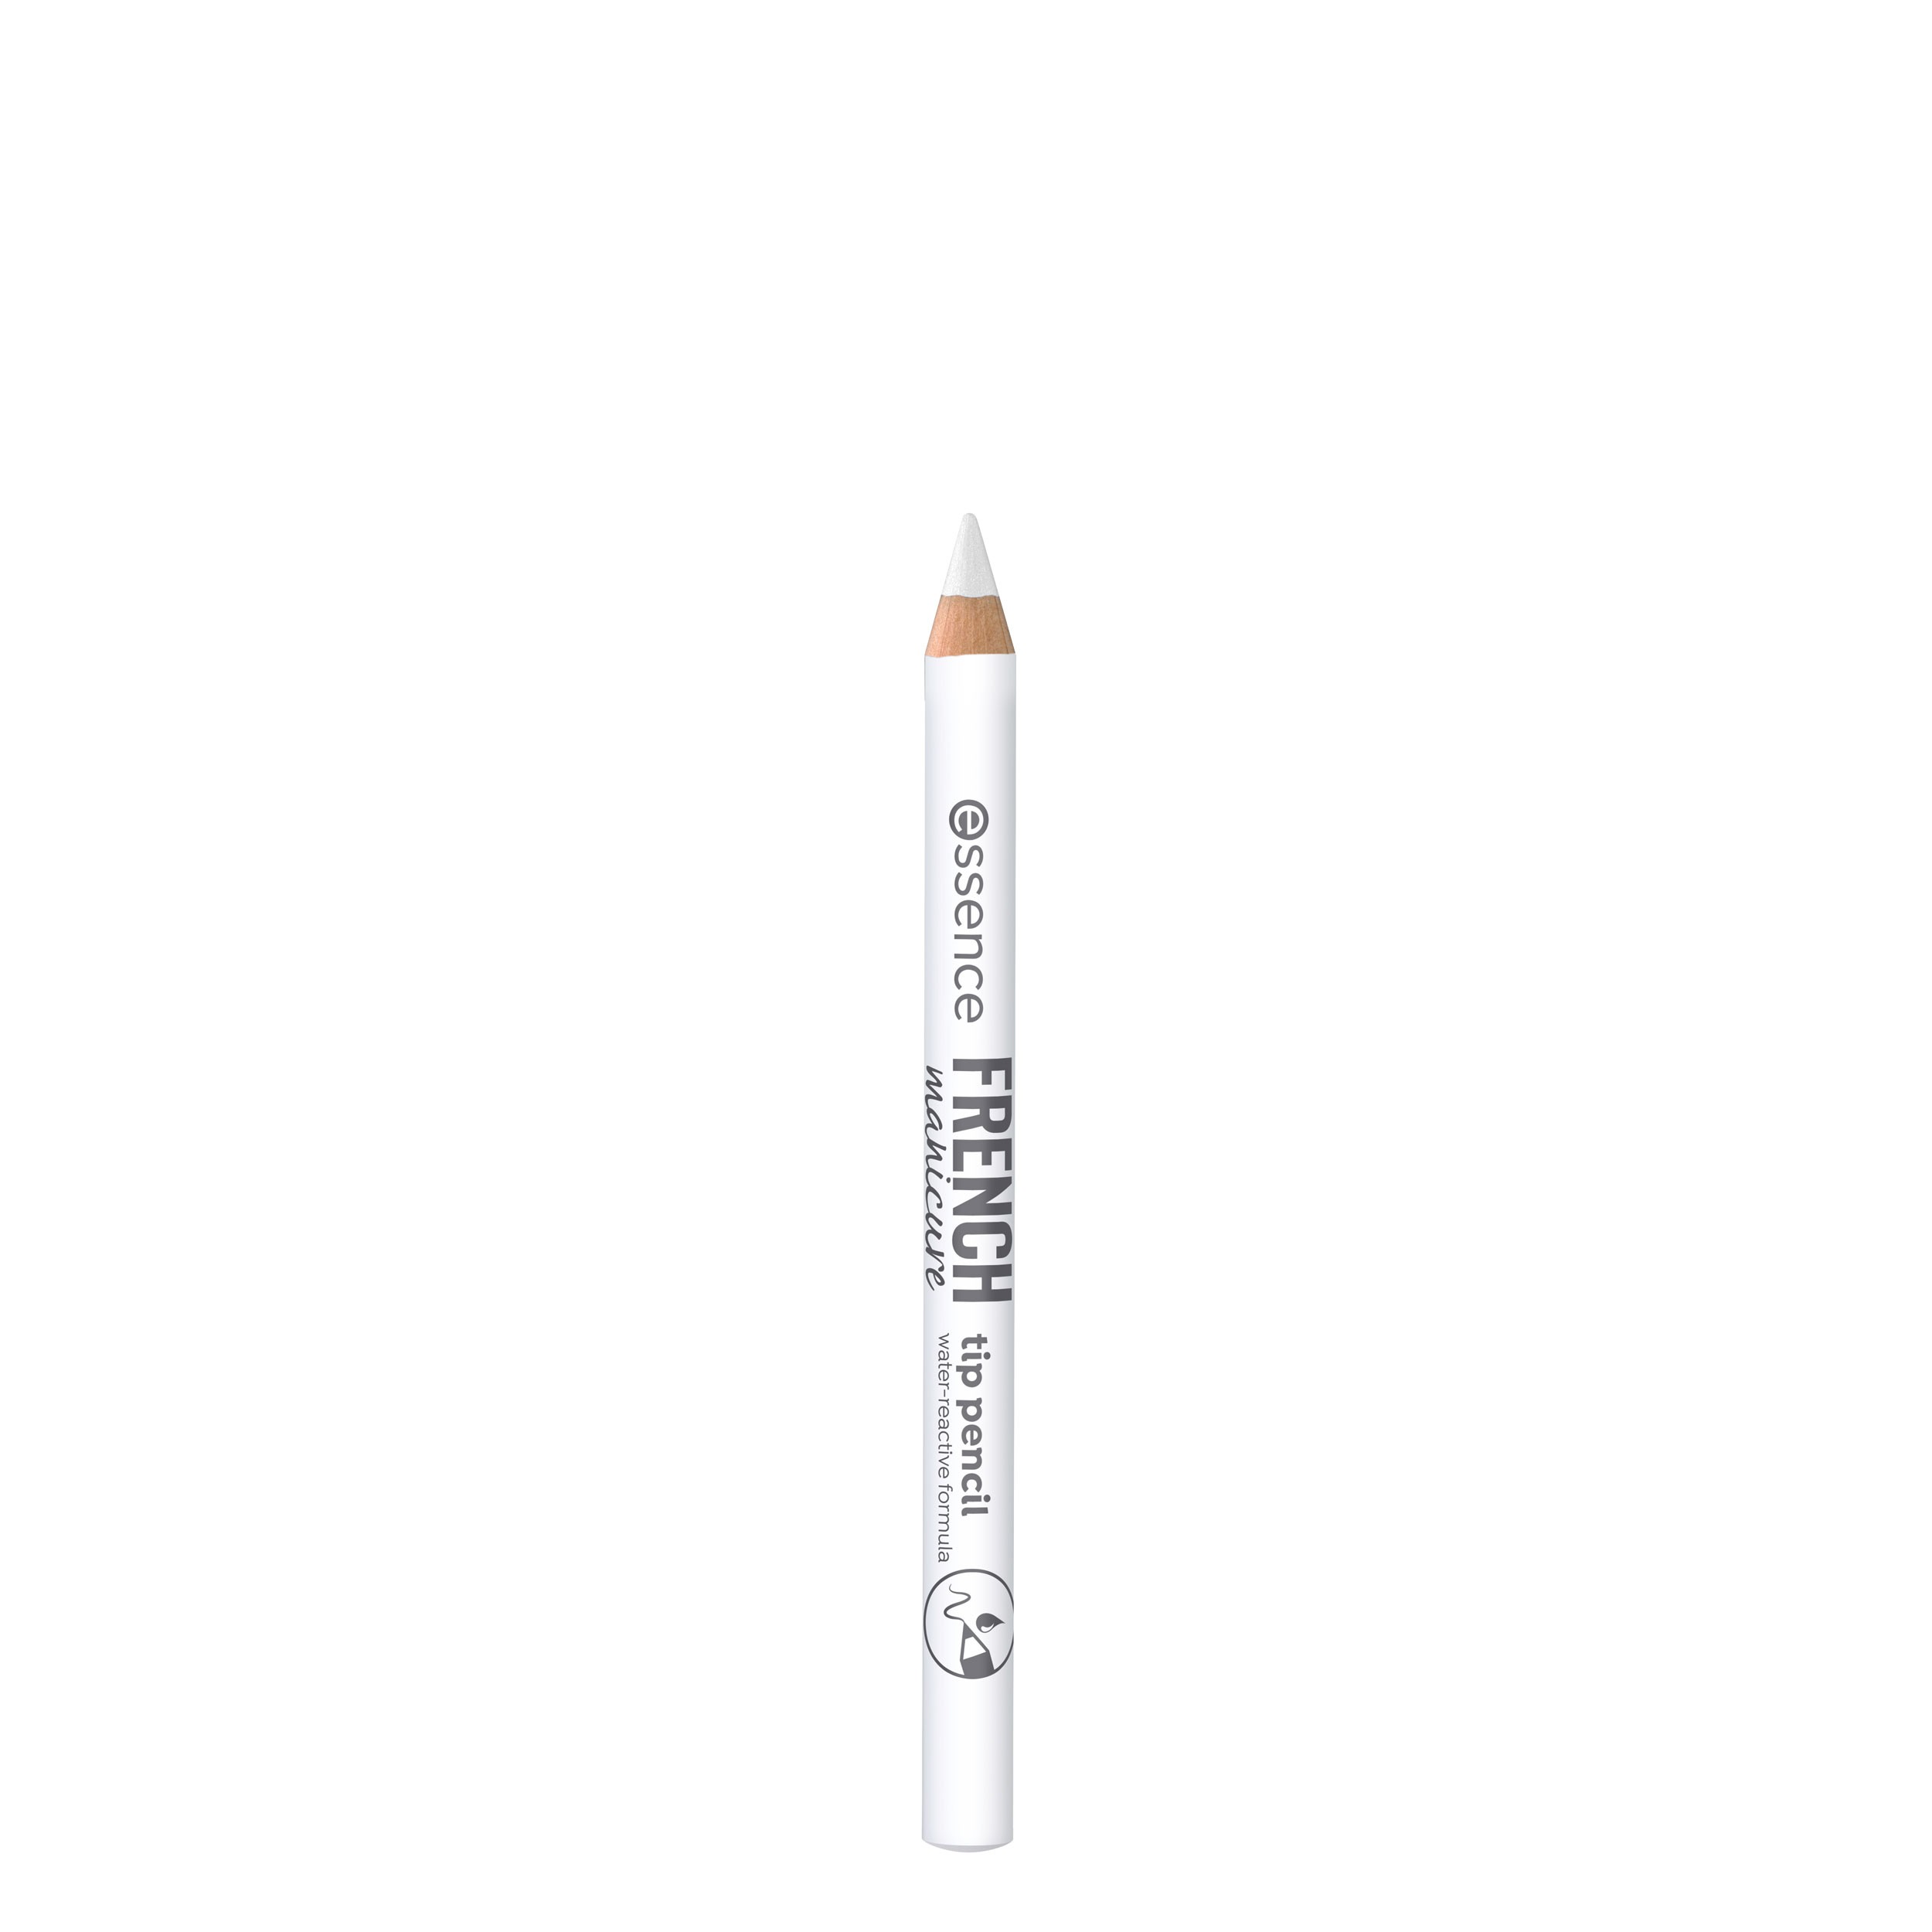 FRENCH Manicure Tip Pencil